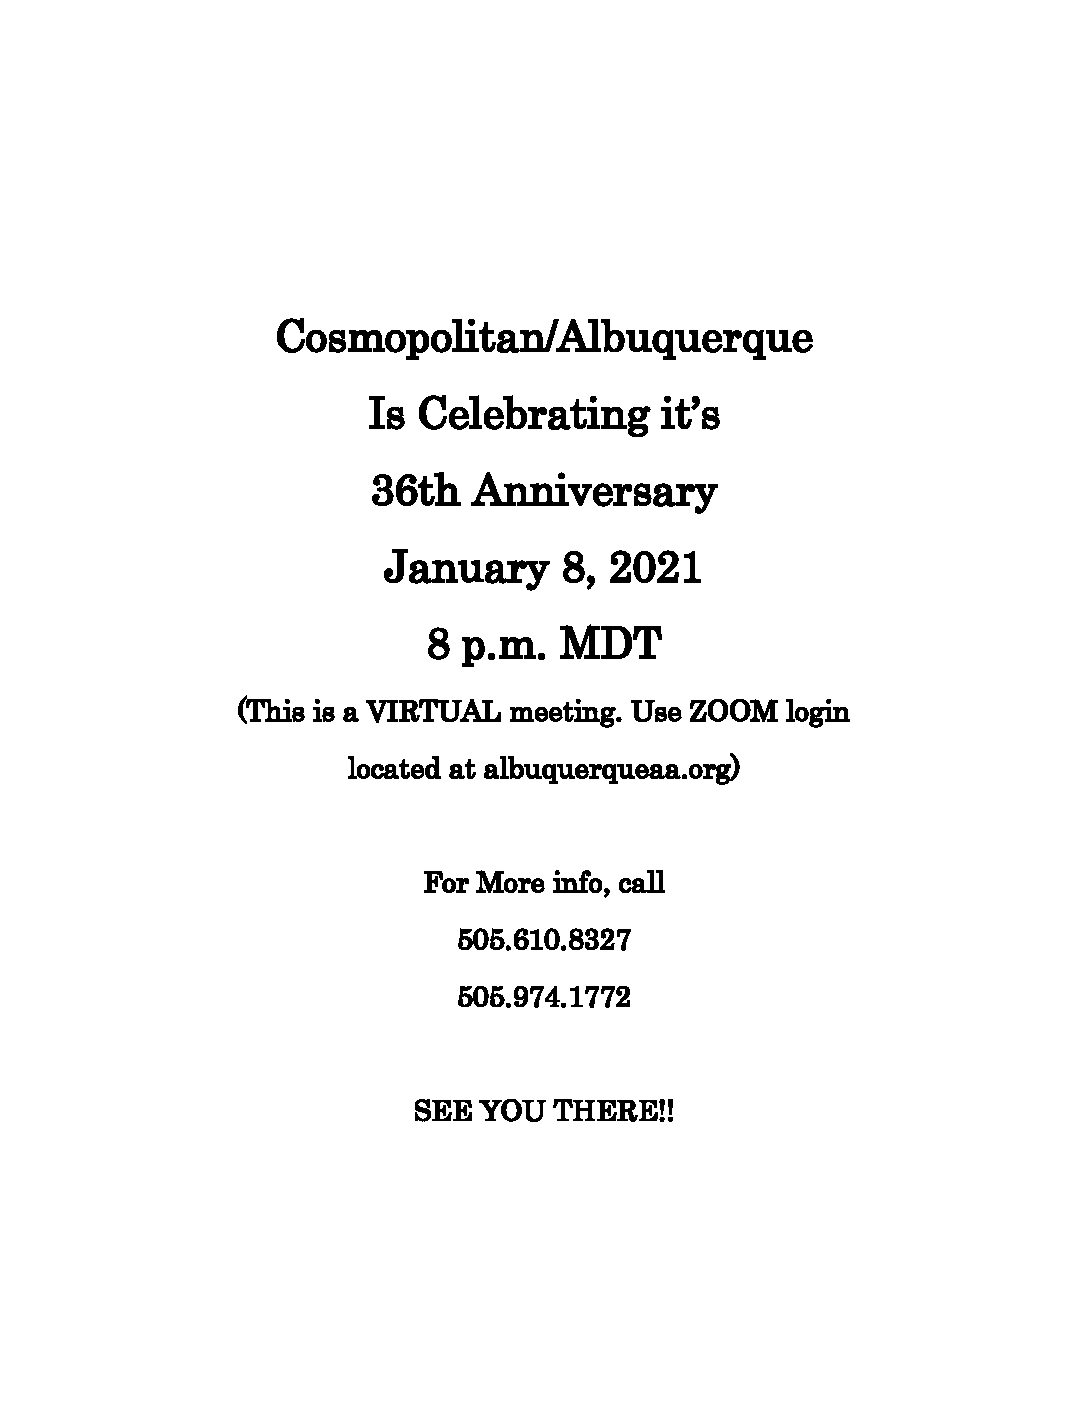 The Cosmopolitan Group Is Celebrating its 36th Anniversary January 8, 2021